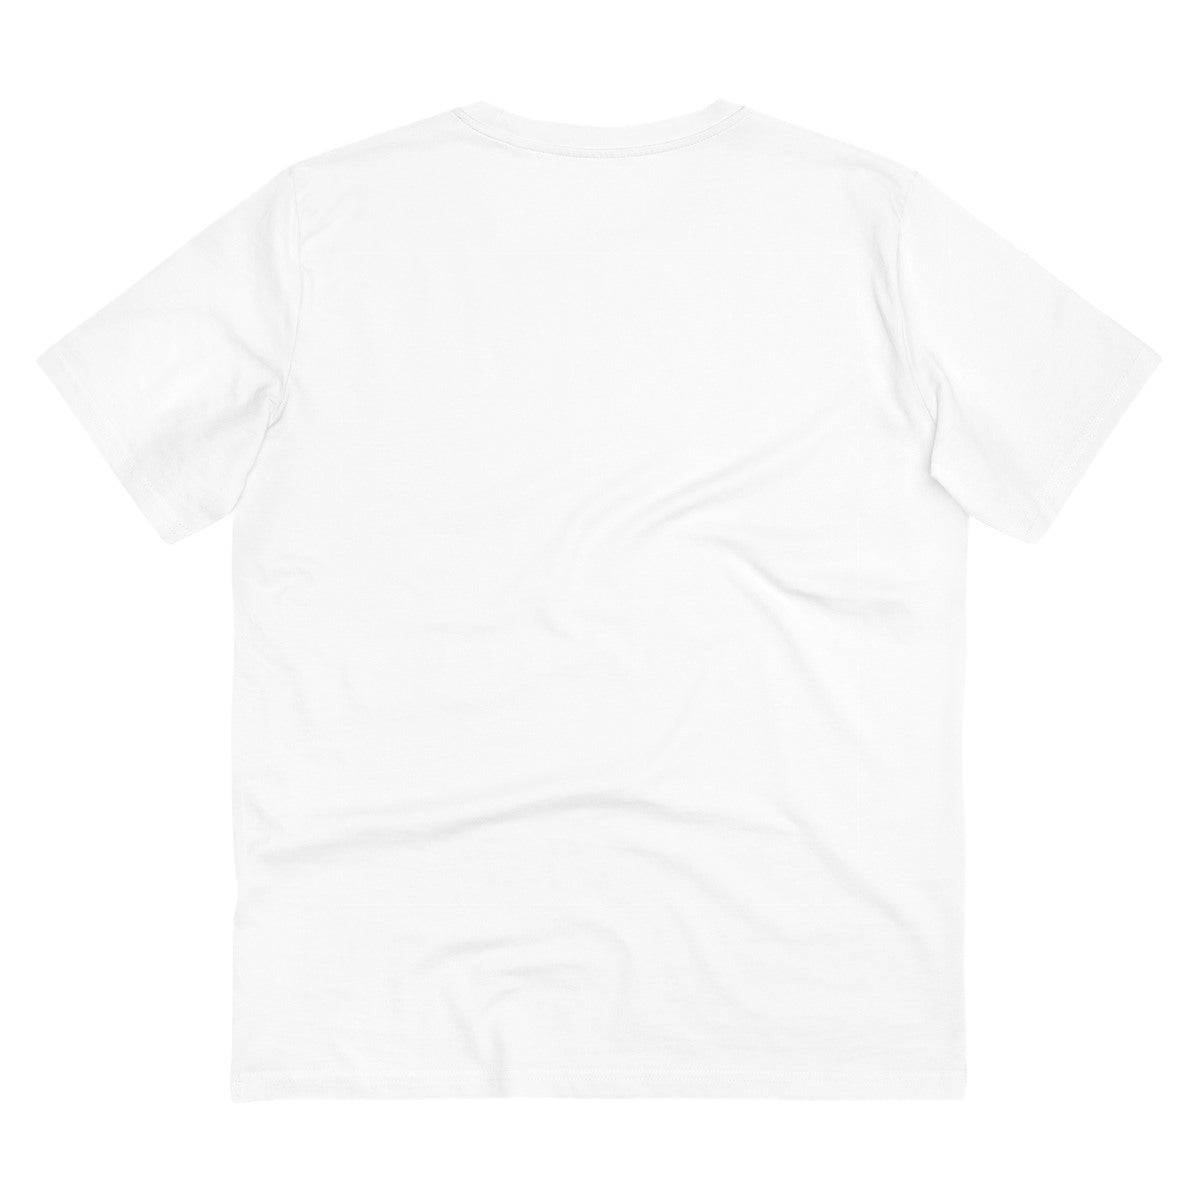 Men's PC Cotton 28th Birthday Printed T Shirt (Color: White, Thread Count: 180GSM) - GillKart